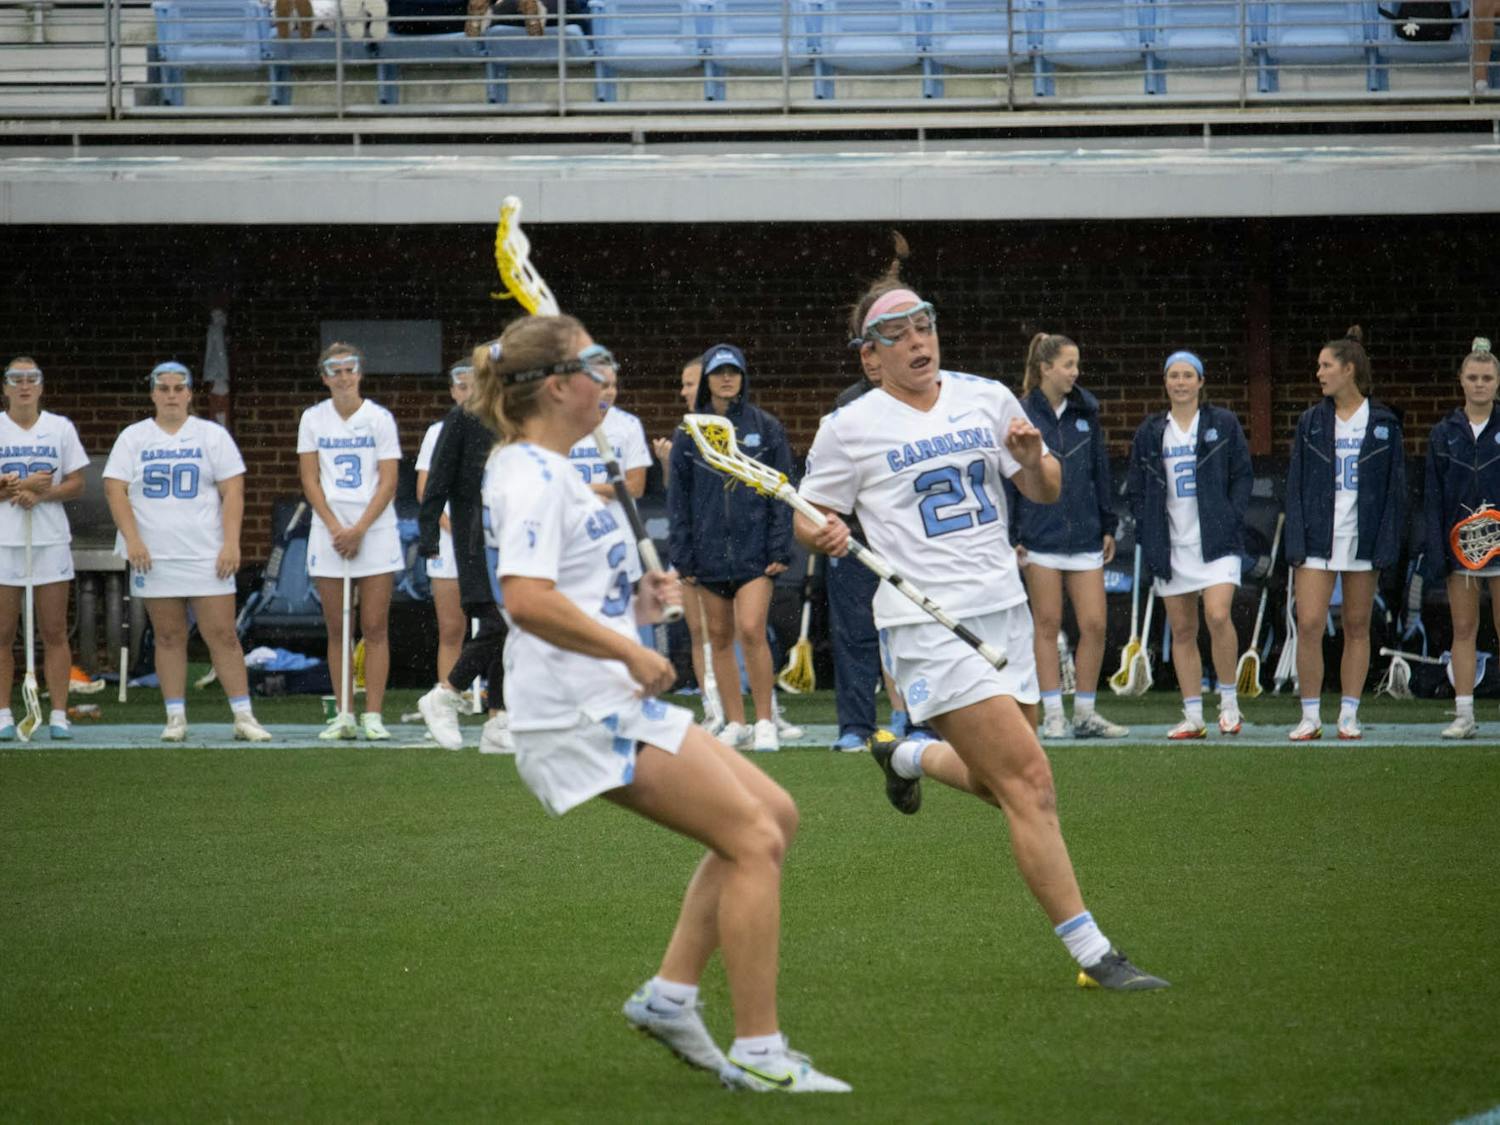 UNC first-year attacker Marissa White (21) runs down the field during the women’s lacrosse game against Clemson at Dorrance Field on Sunday, March 26, 2023. UNC beat Clemson 17-8.